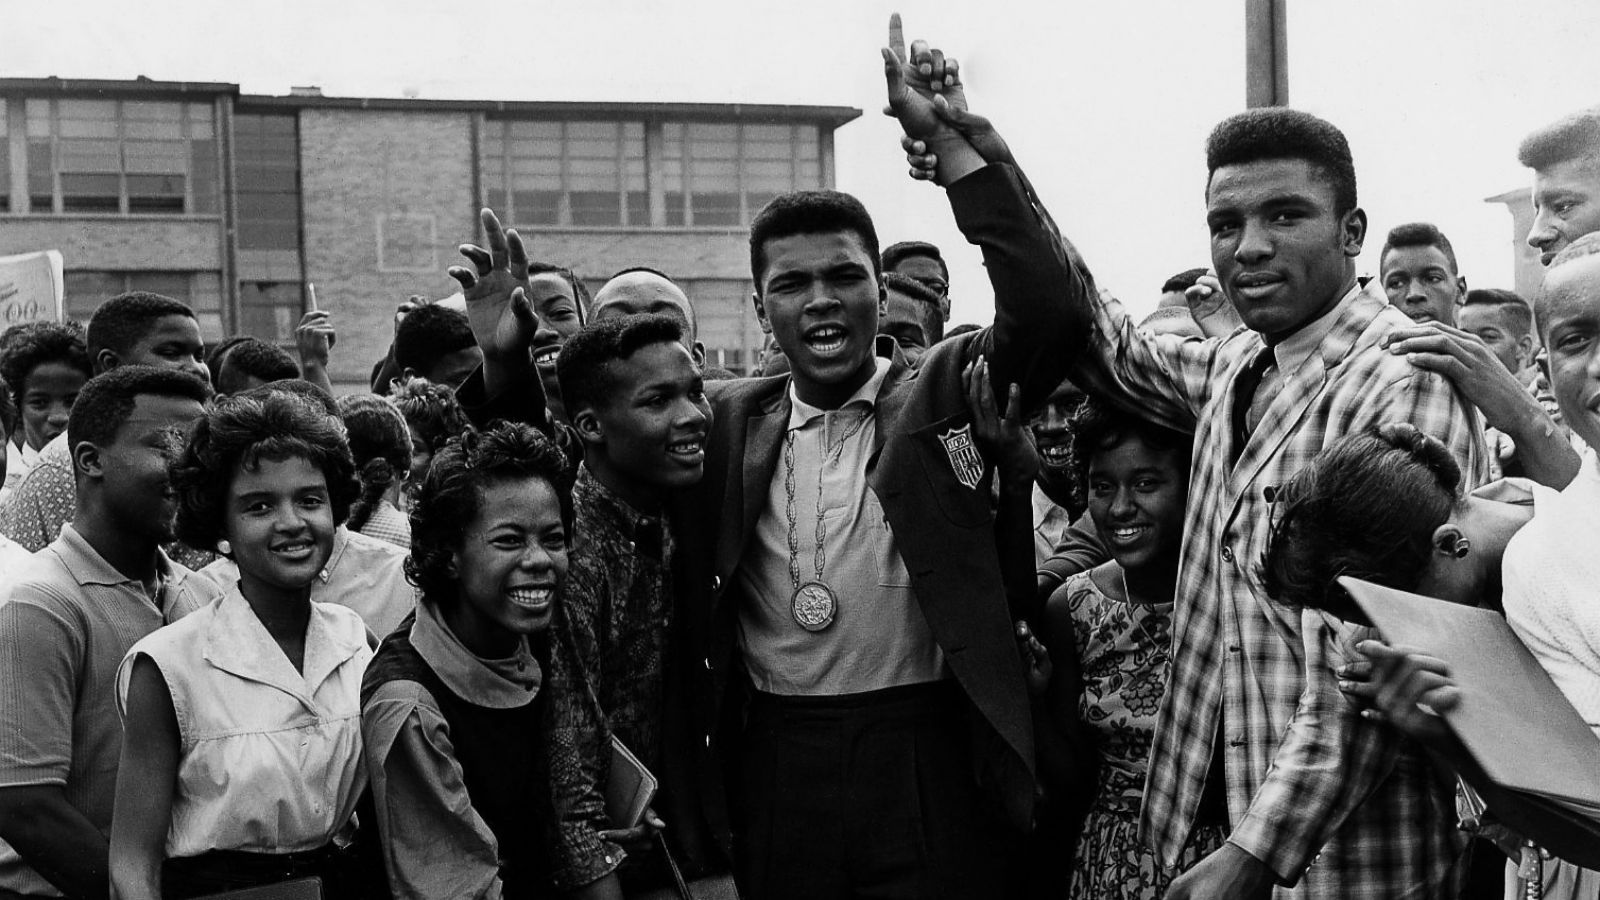 Muhammad Ali to be honored in his hometown of Louisville, Kentucky